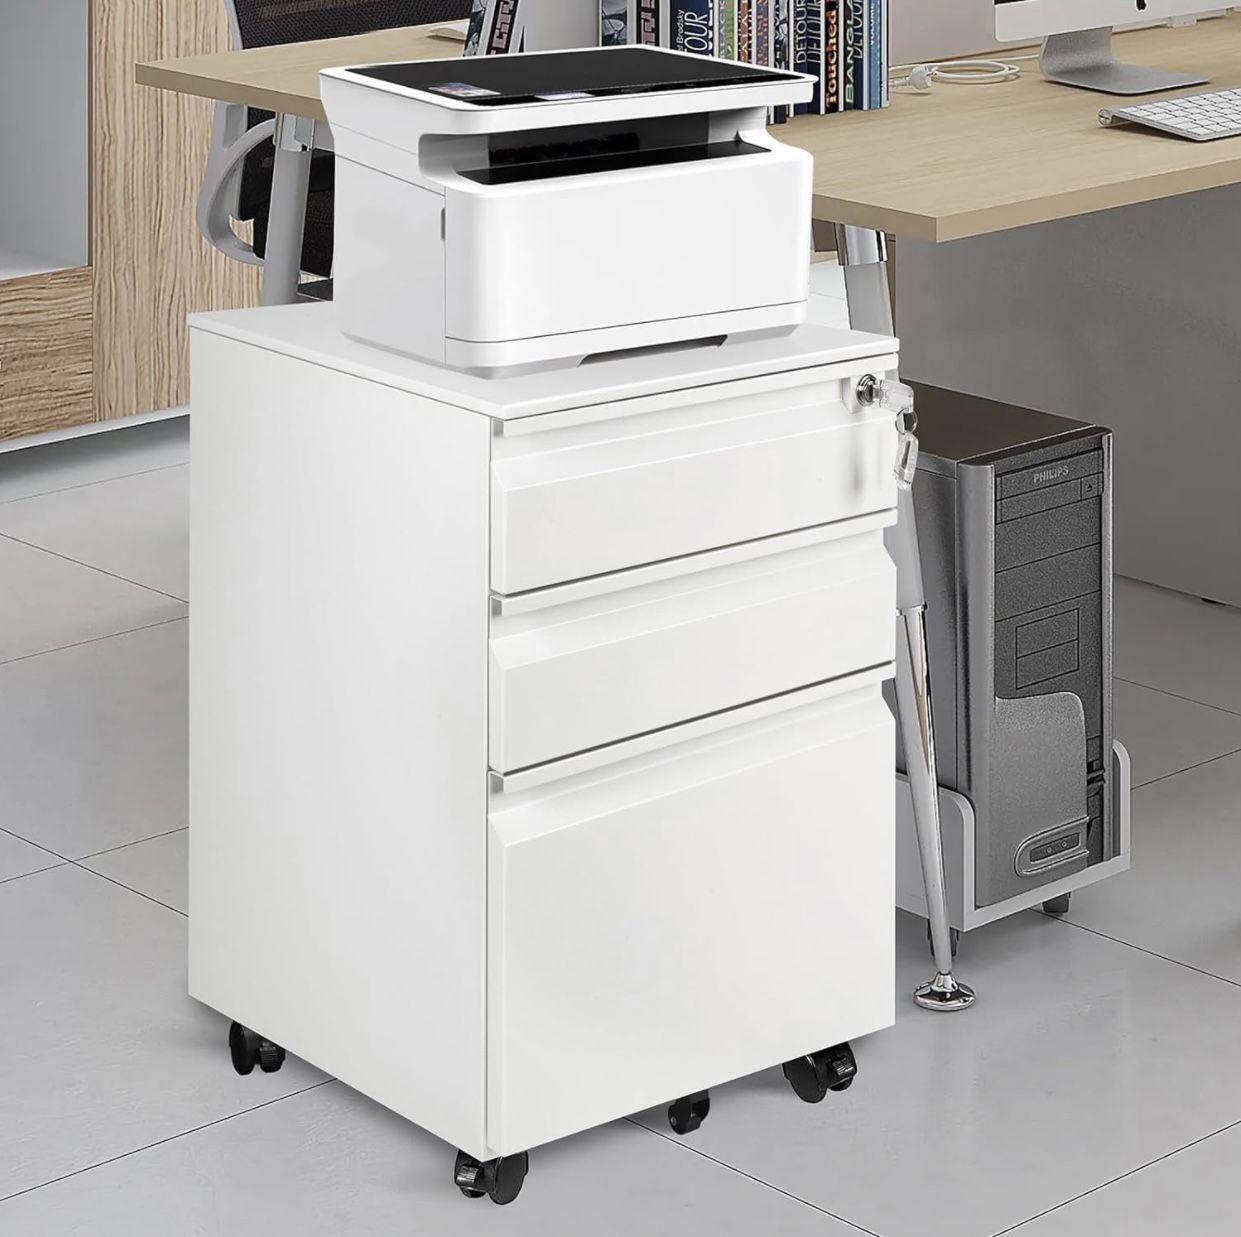 Mobile File Cabinet w/3 Drawers Heavy Duty 19.69"Dx15.35"Wx23.62"H, Fully Assembled, Filing Cabinet